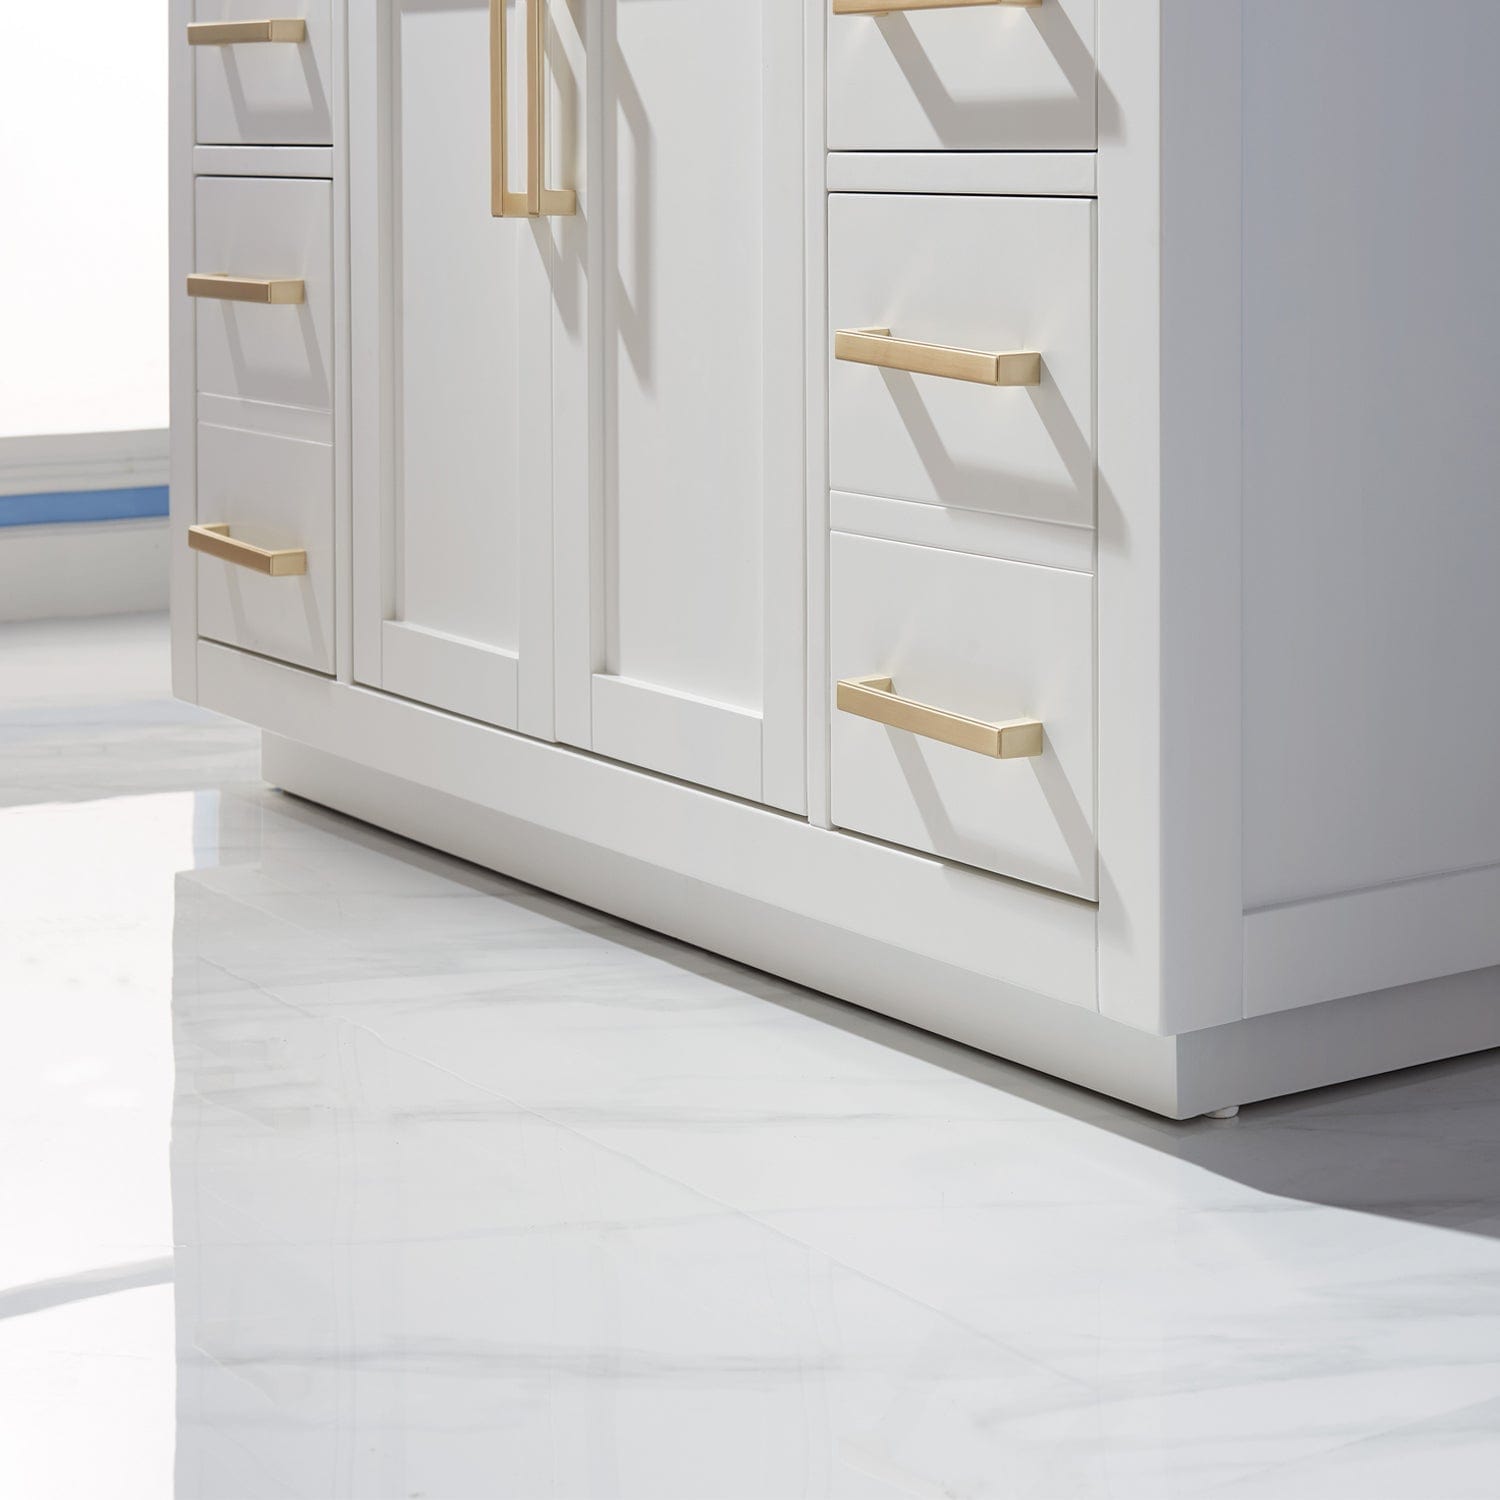 Altair Ivy 48" Single Bathroom Vanity Set in White and Carrara White Marble Countertop with Mirror 531048-WH-CA - Molaix631112971195Vanity531048-WH-CA